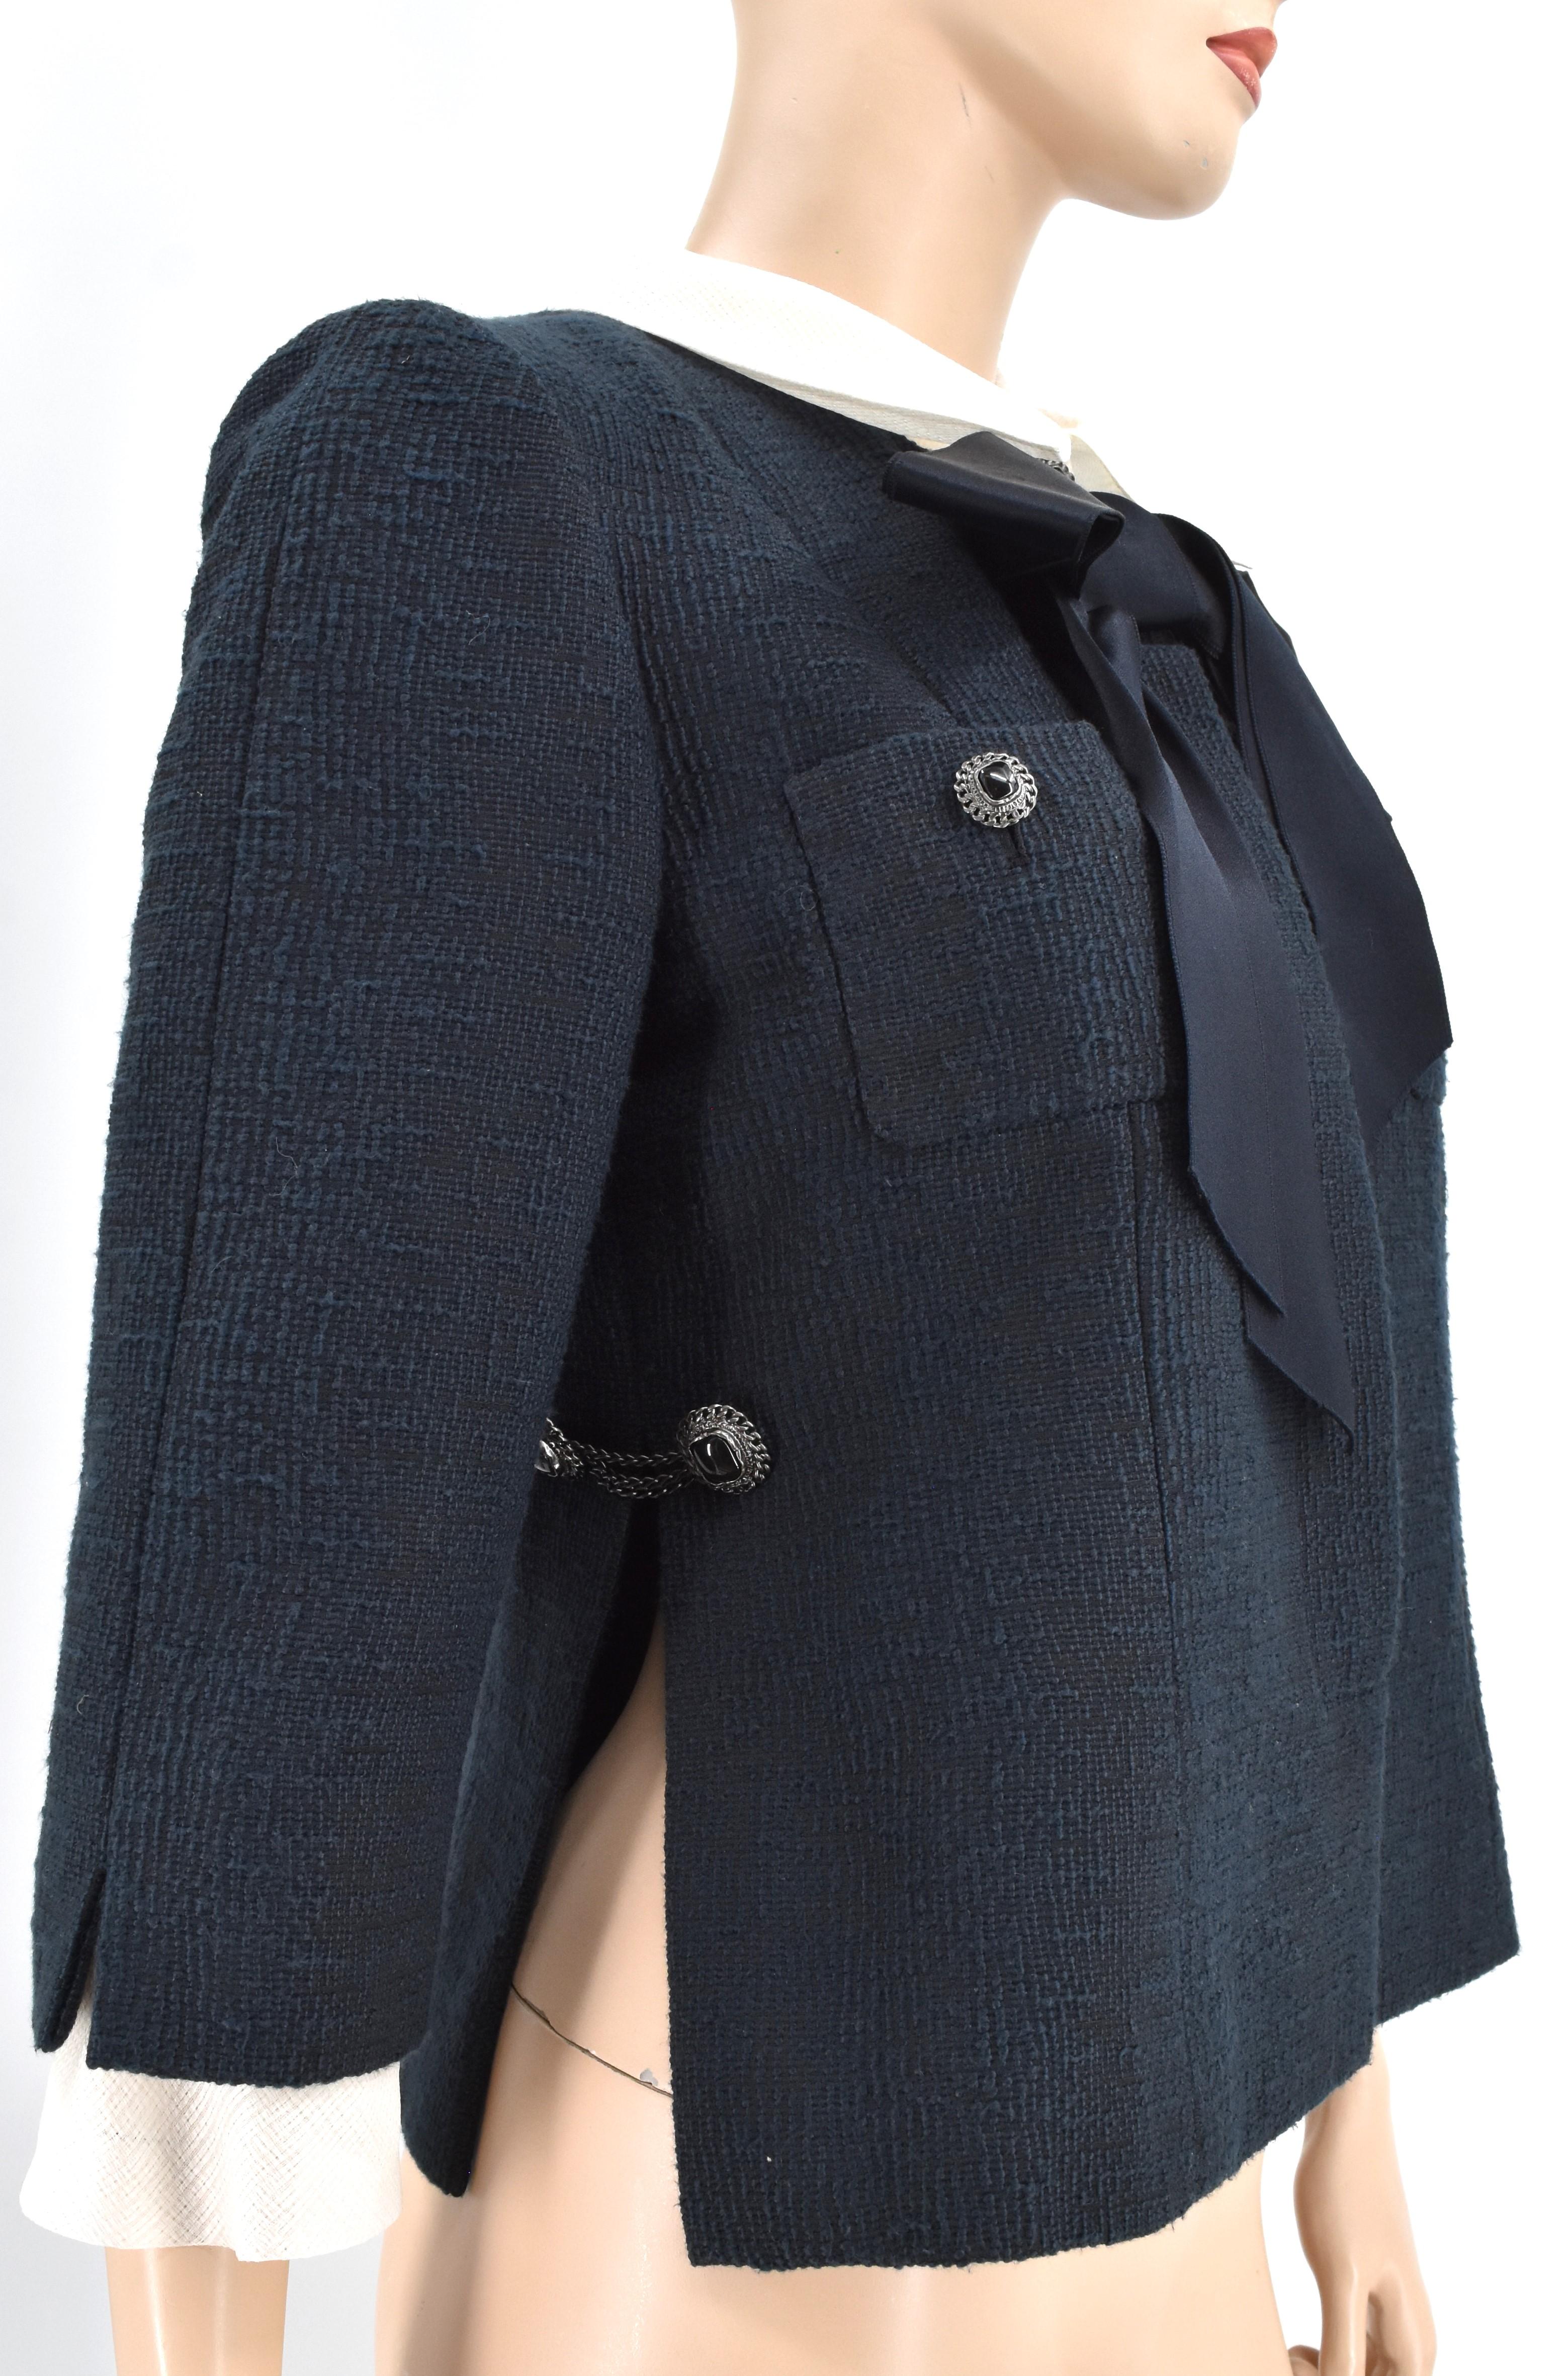 Chanel Runway bow jacket from Spring 2010. It is adorned with detachable collar and sleeve trim, front pockets, and Chanel interlocking CC logo buttons. This is new without tags.